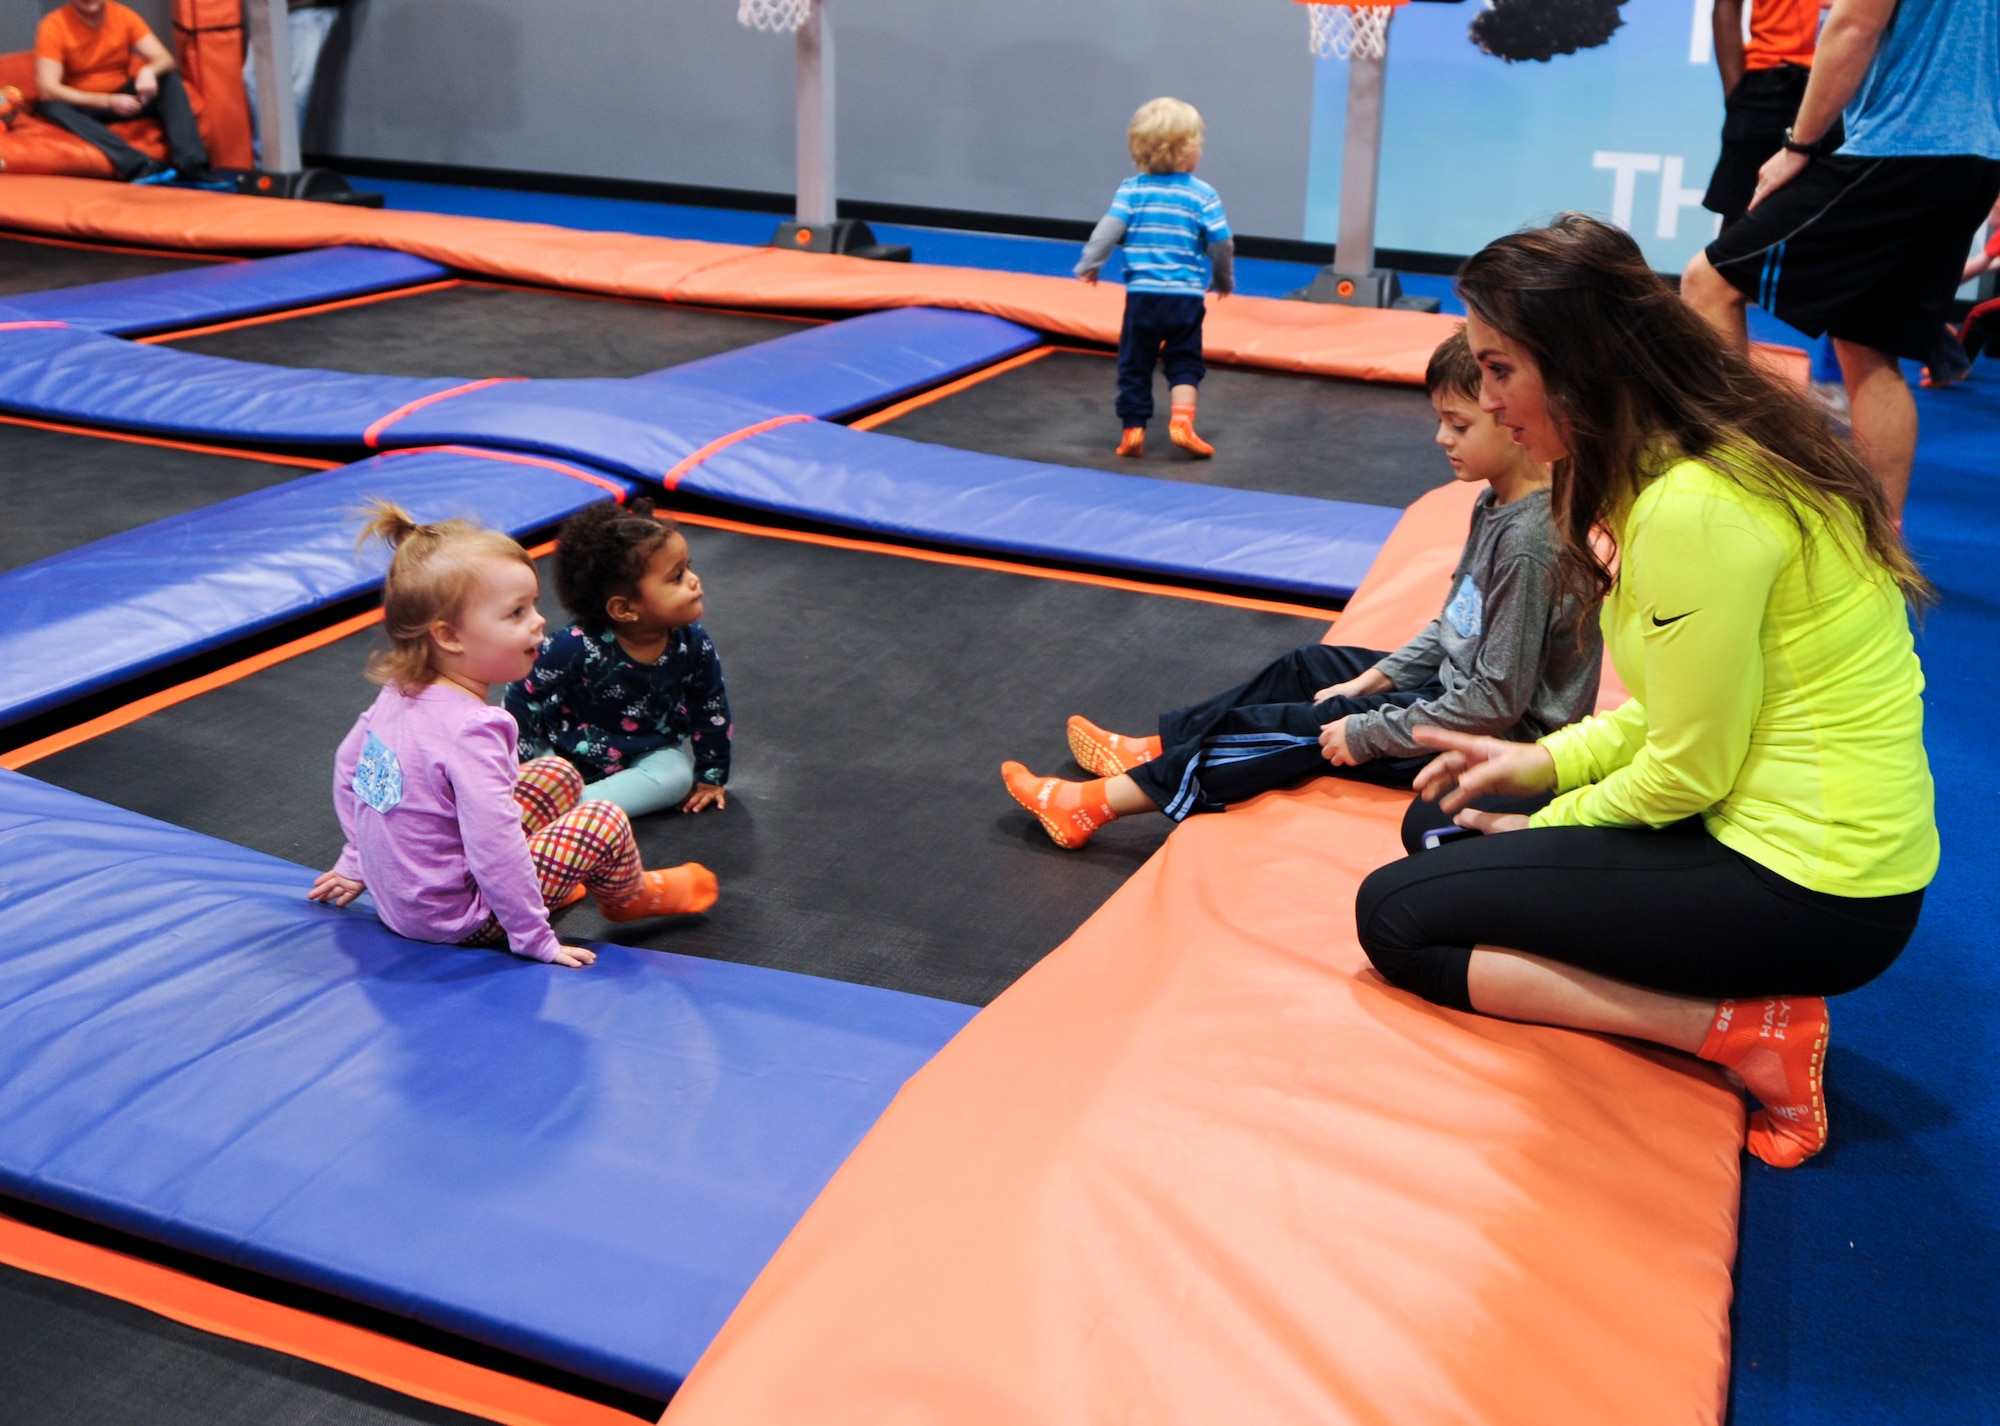 Elizabeth Clark, a community readiness specialist with the Hurlburt Field Airman and Family Readiness Center, engages with children during a Hearts Apart event at the Sky Zone in Pensacola, Fla., Jan. 28, 2017. The Hurlburt Airman and Family Readiness Center hosts monthly events and offers support opportunities for families of deployed Air Commandos. (U.S. Air Force photo by Senior Airman Kasie P. Whitfield)